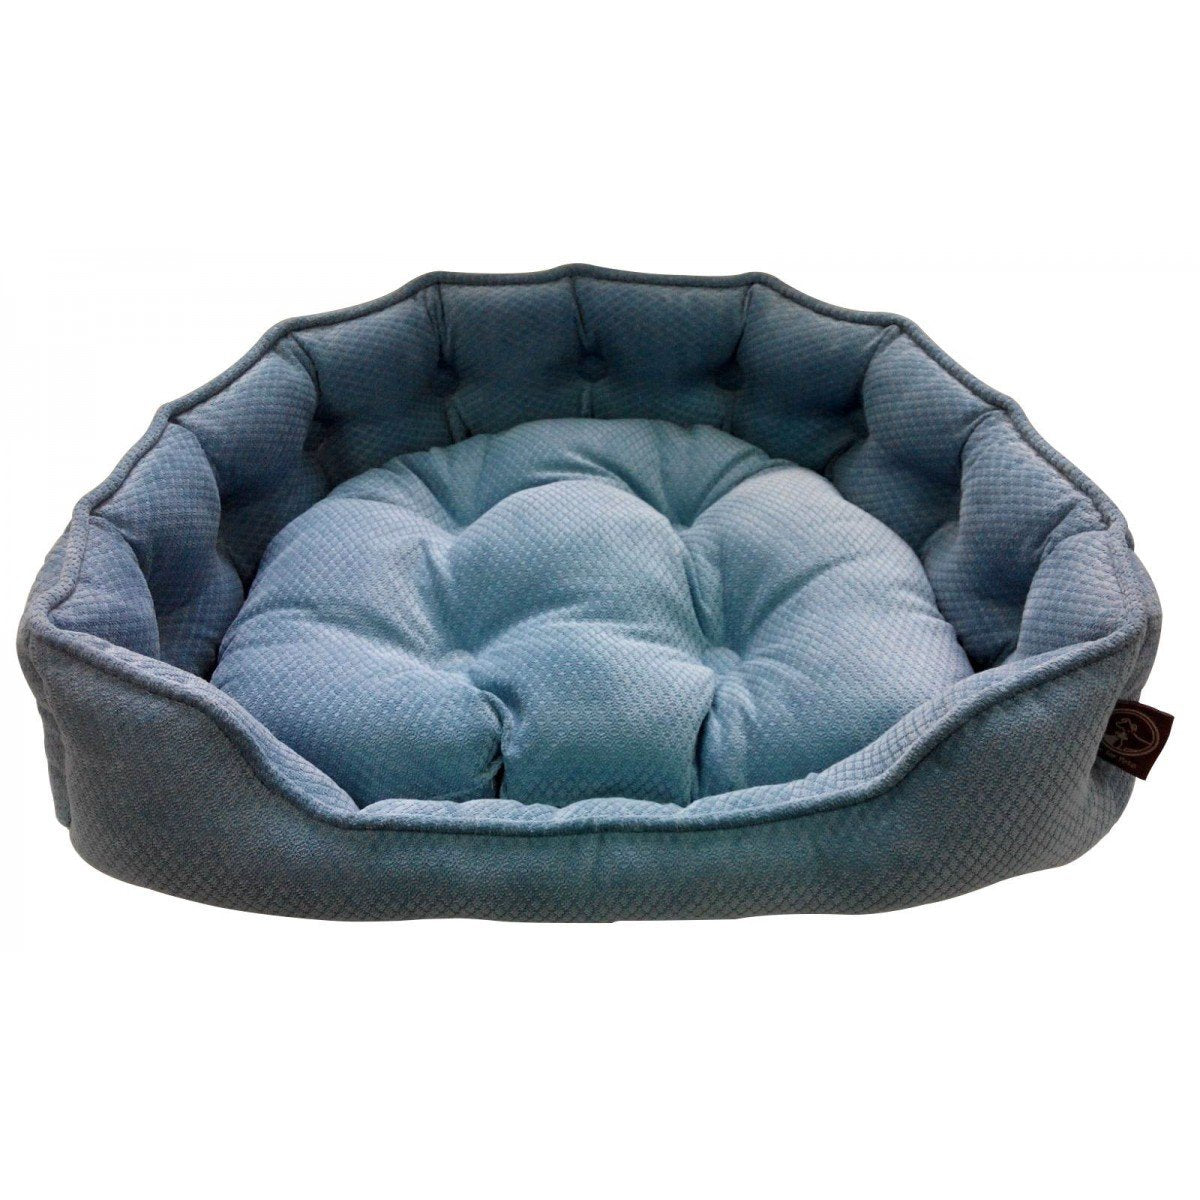 One for Pets - Duna Snuggle Bed